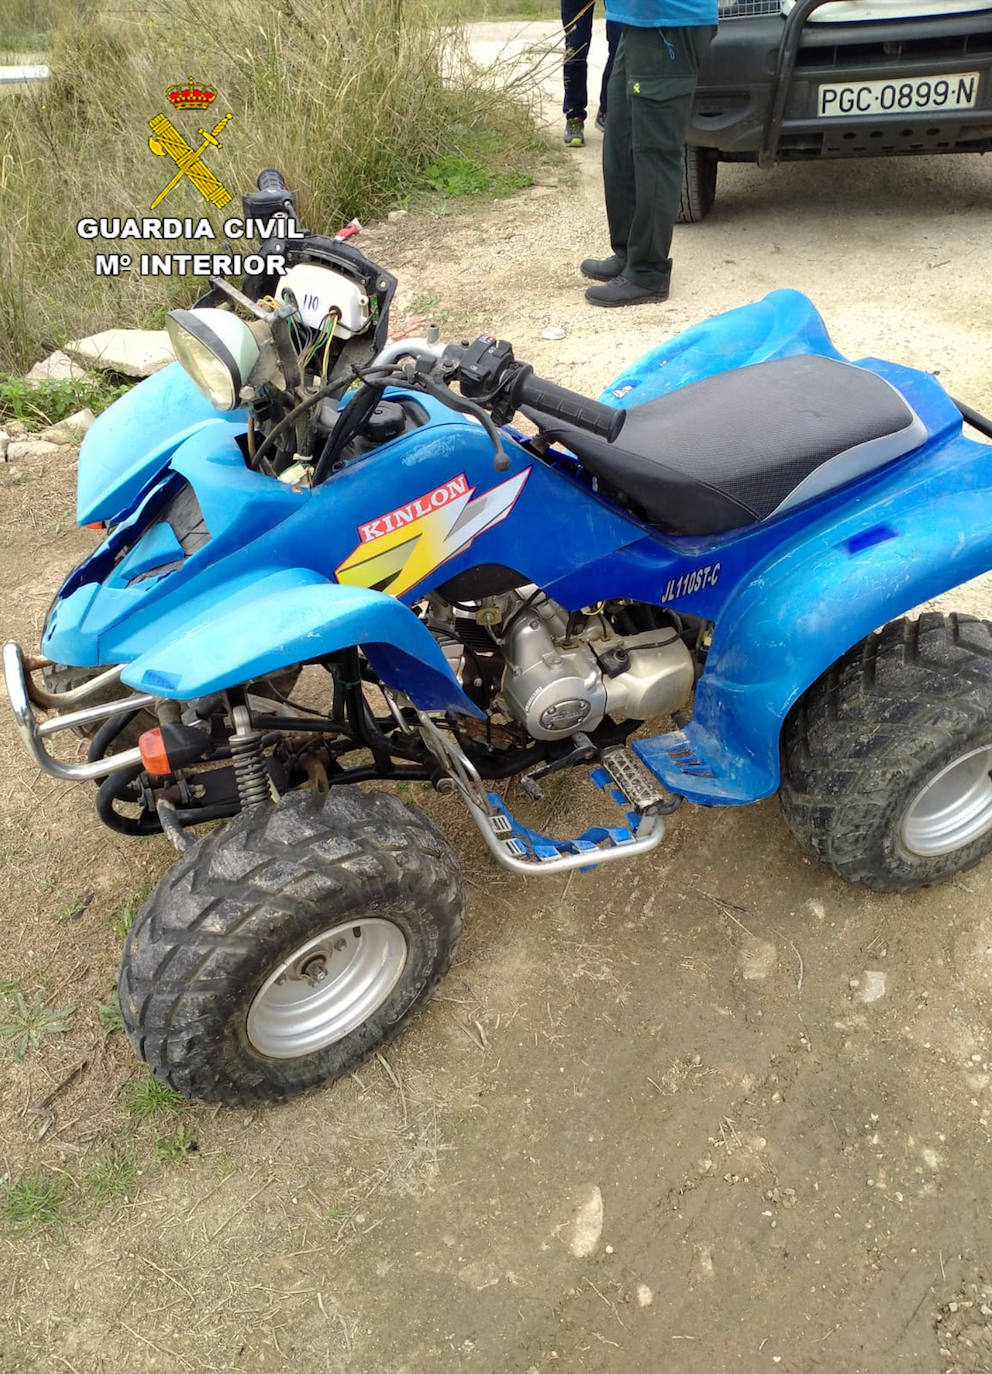 The 'quad' stolen from the Pliego country house.